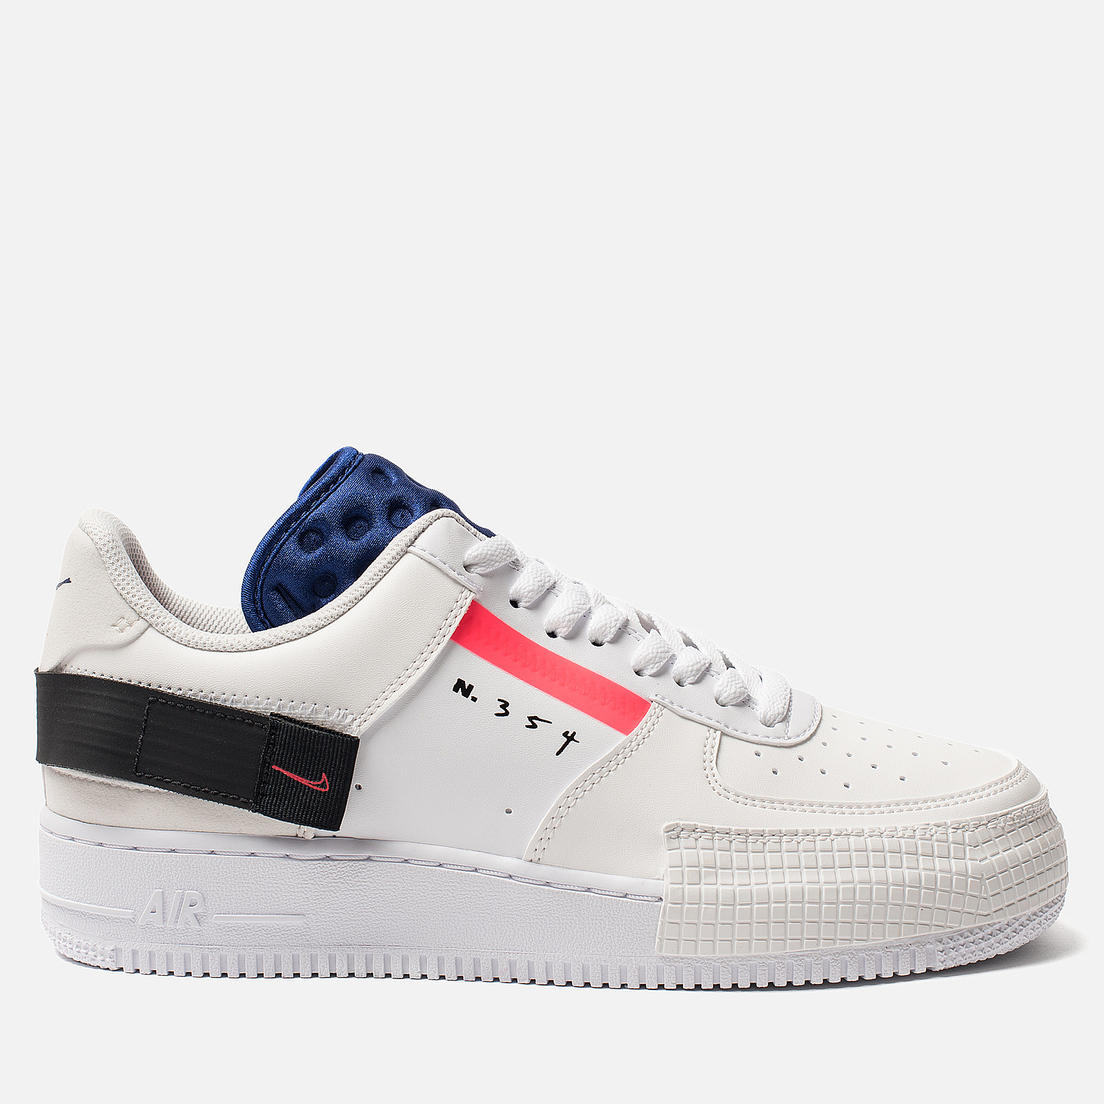 Nike Air Force 1 Low Type CI0054 